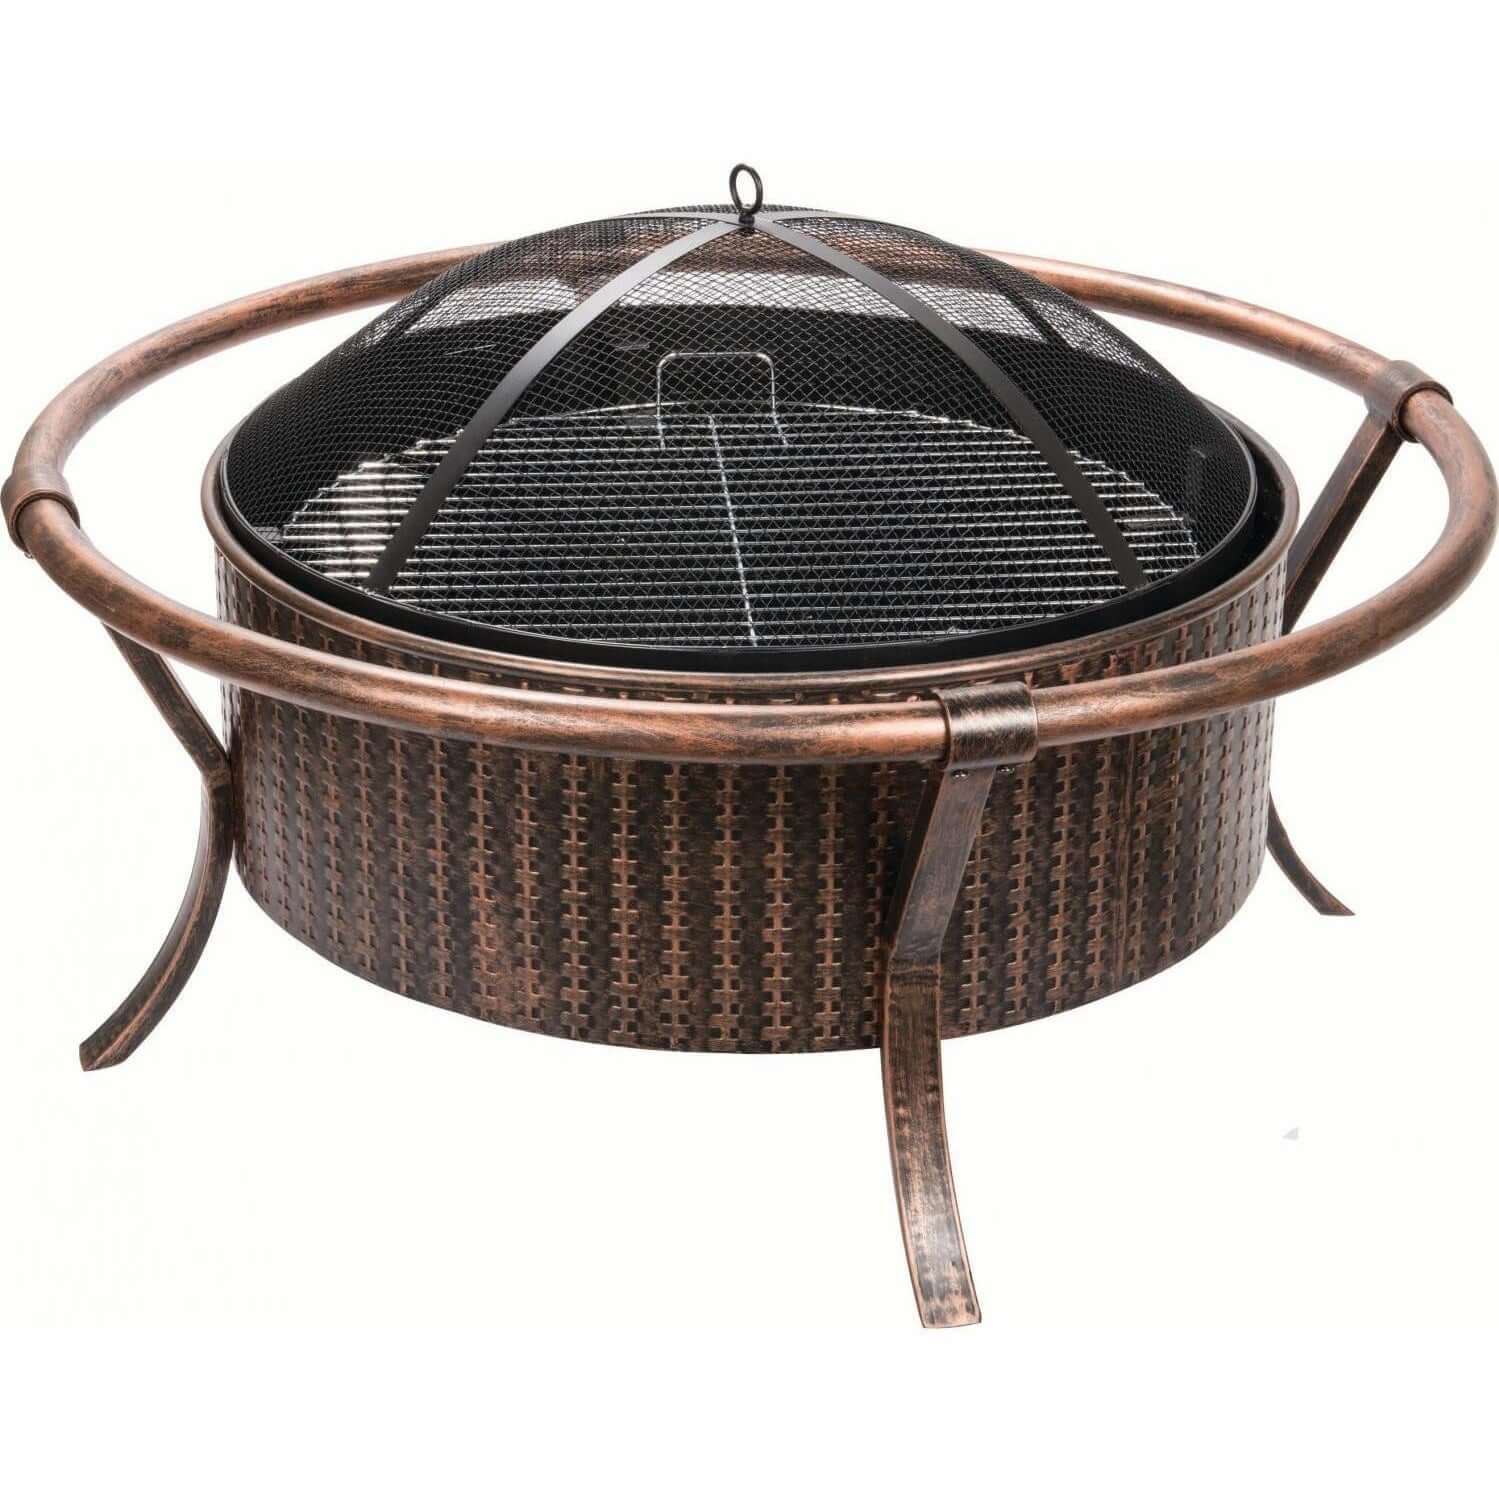 Alpine Flame 37-Inch Copper And Black Wood Burning Fire Pit With Weave Design